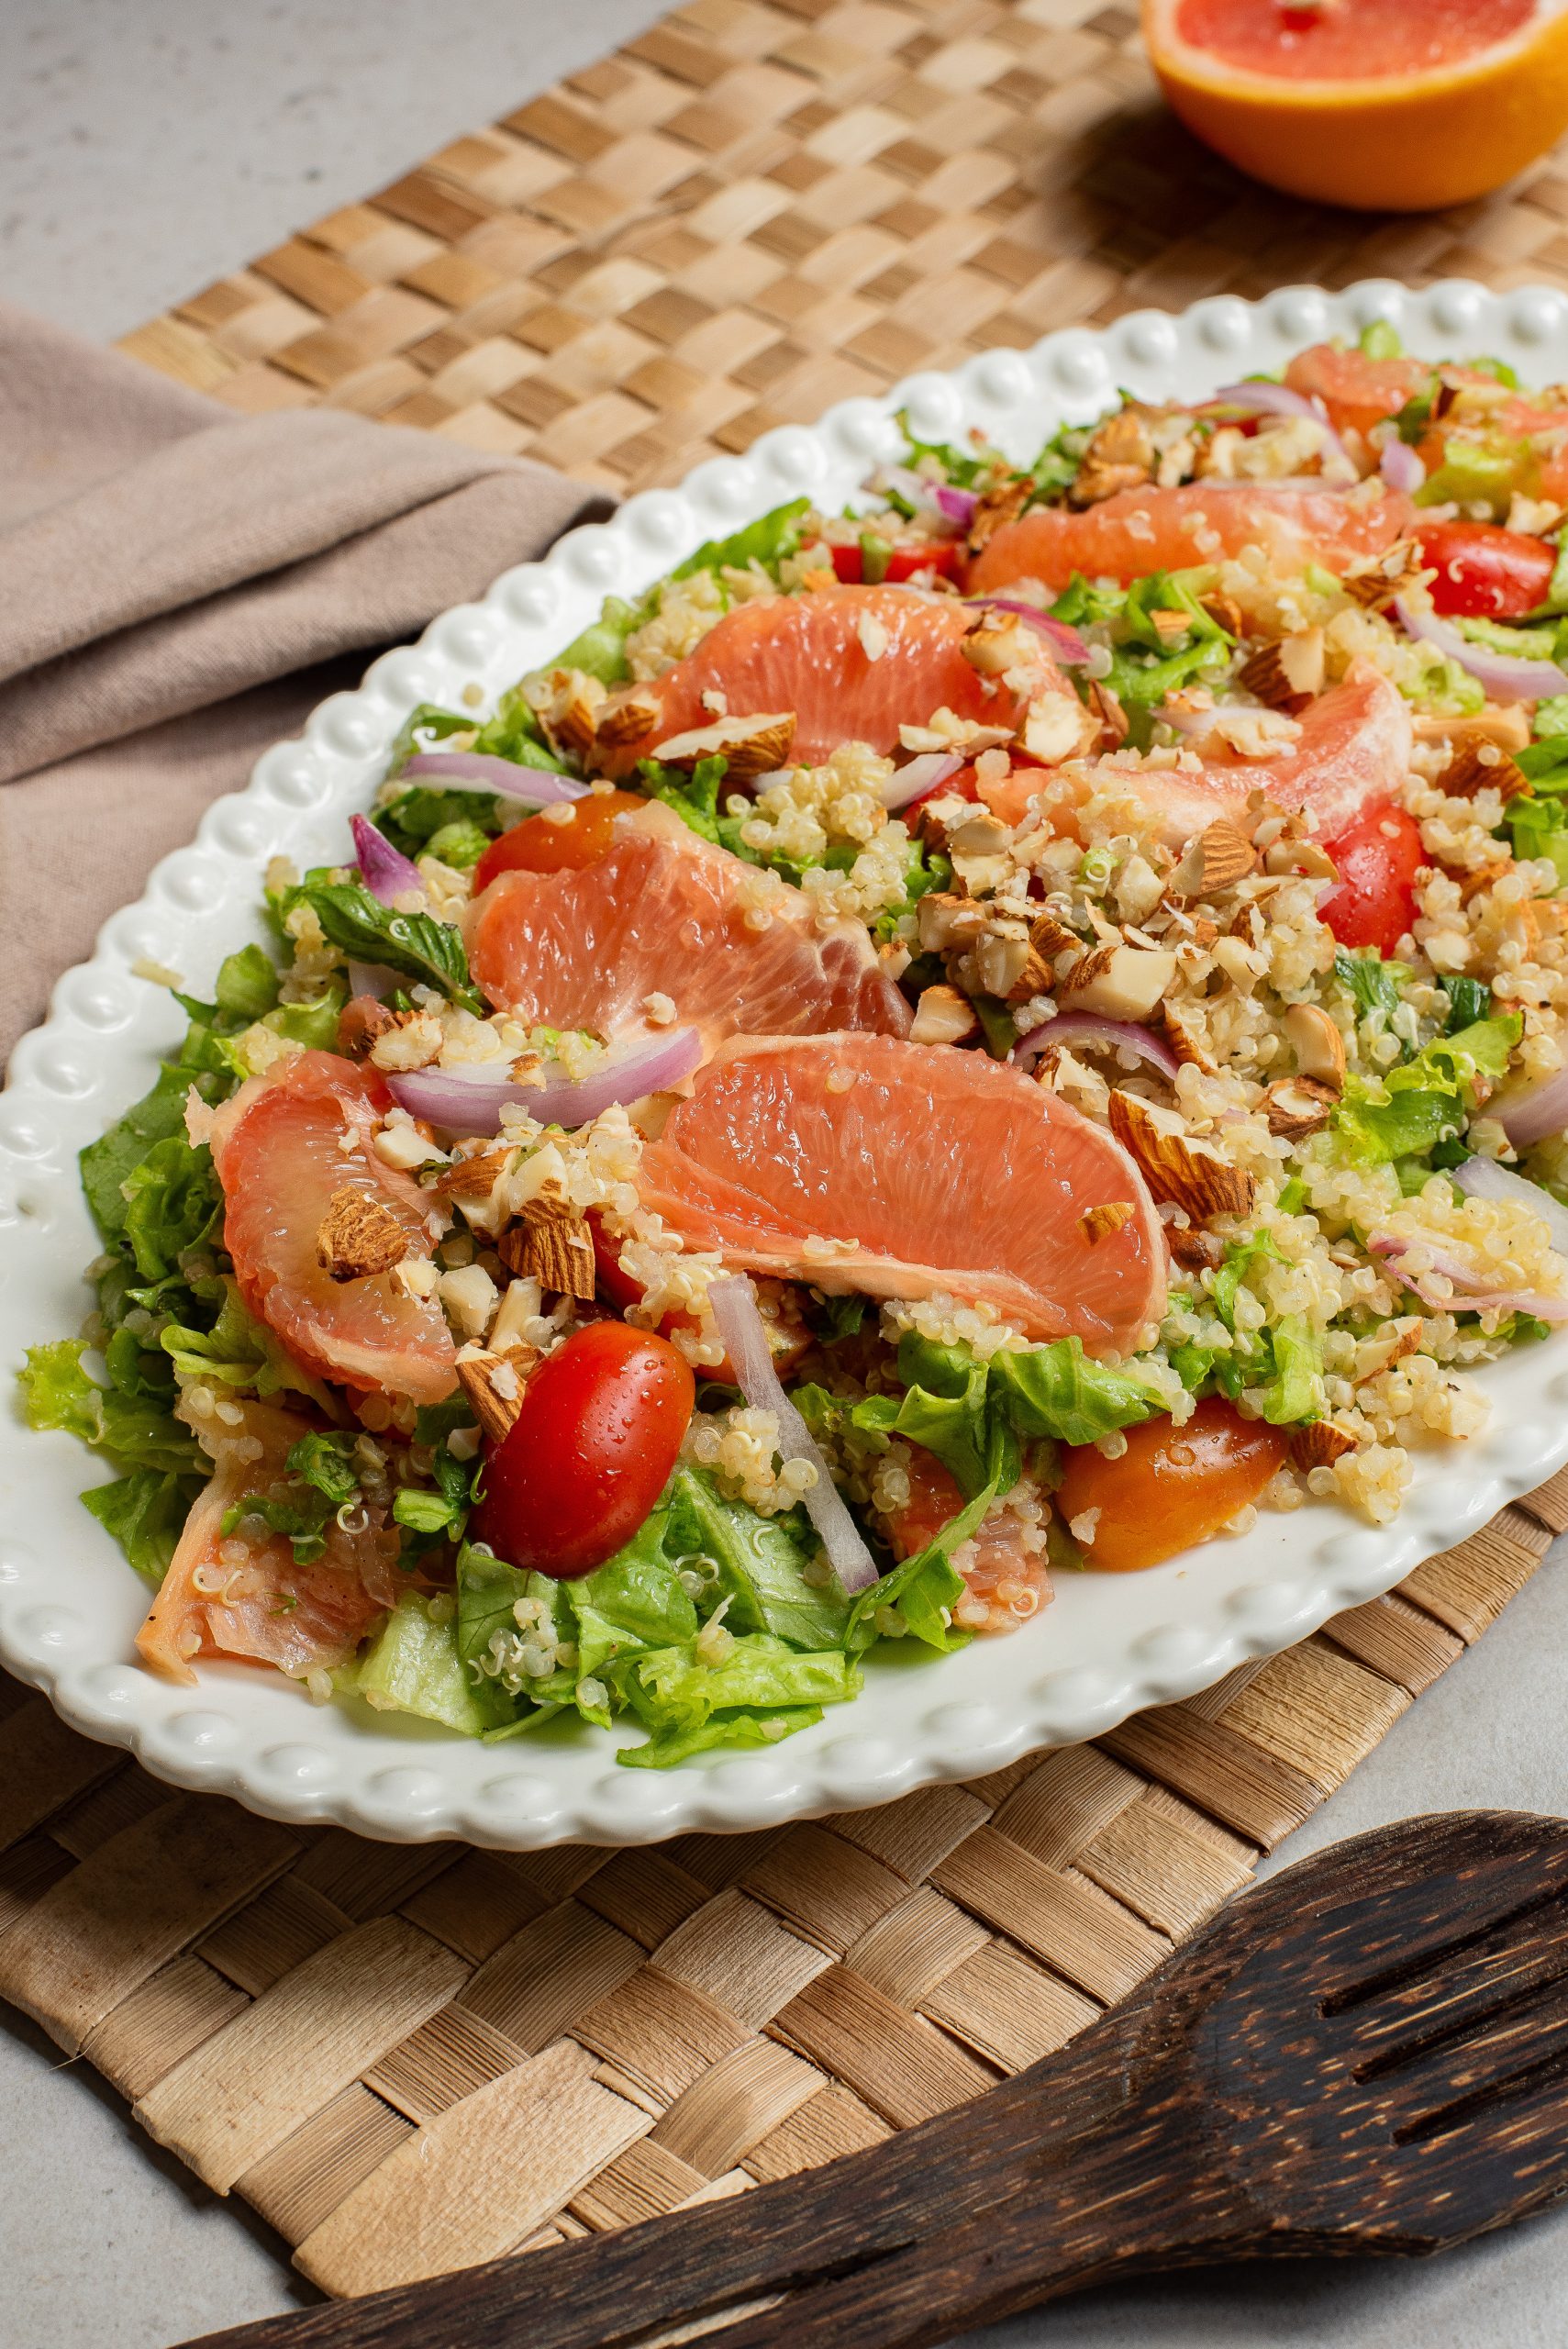 A plate of quinoa salad garnished with grapefruit slices, cherry tomatoes, and nuts on a woven placemat.